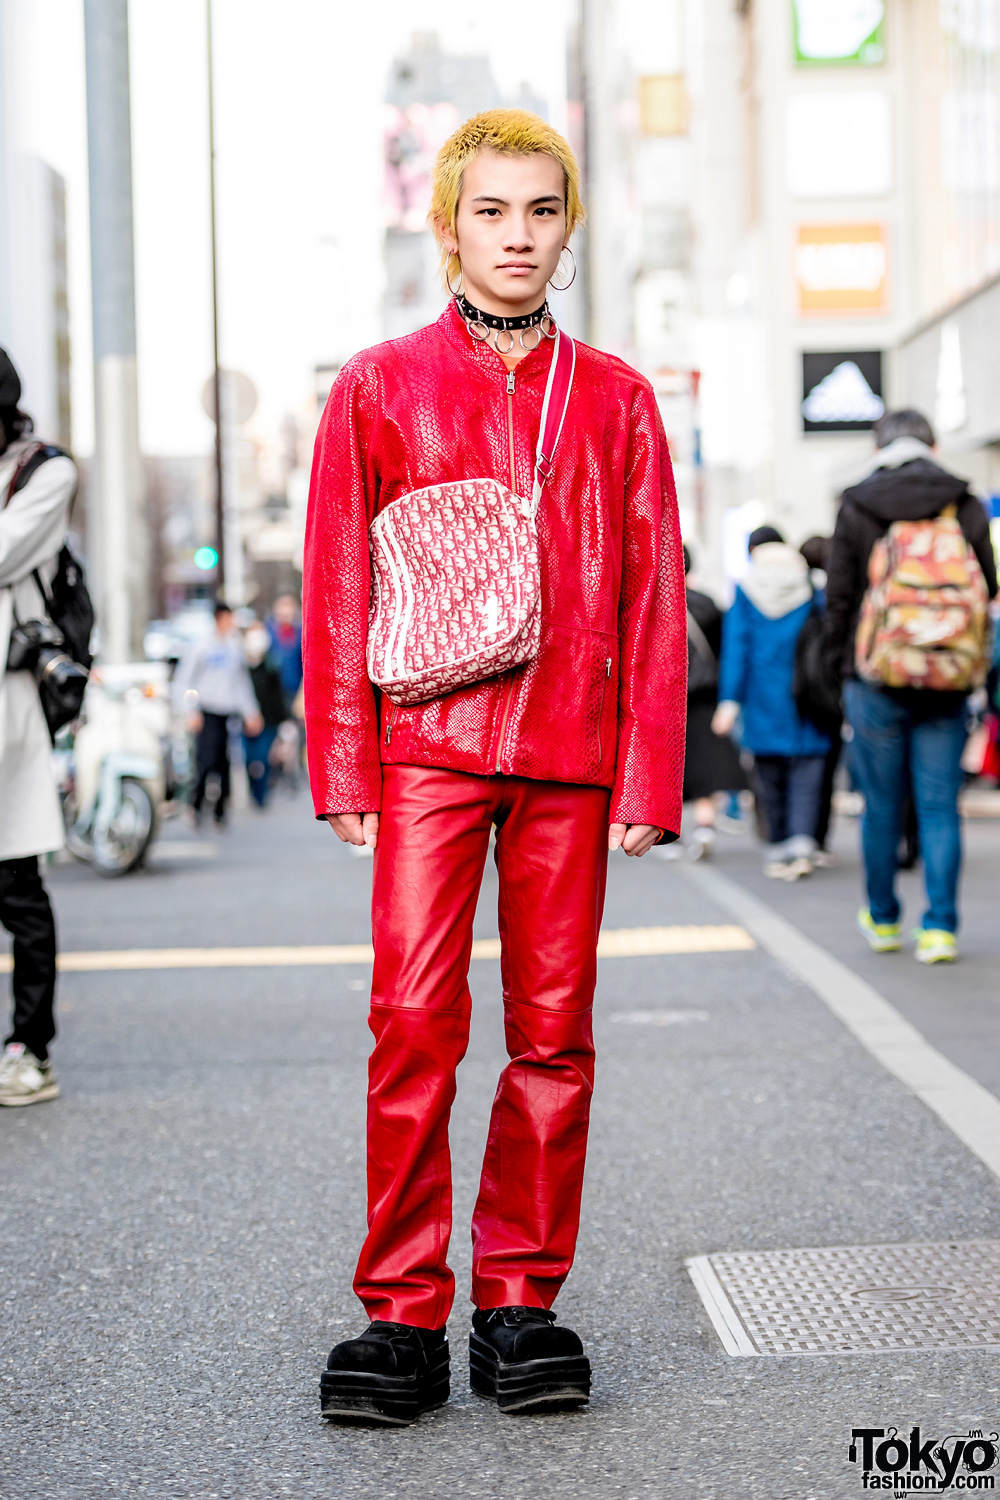 All Red Streetwear Style w/ Pinnap Snakeskin Jacket, Christian Dior Crossbody Bag & Never Mind the XU Platform Suede Shoes